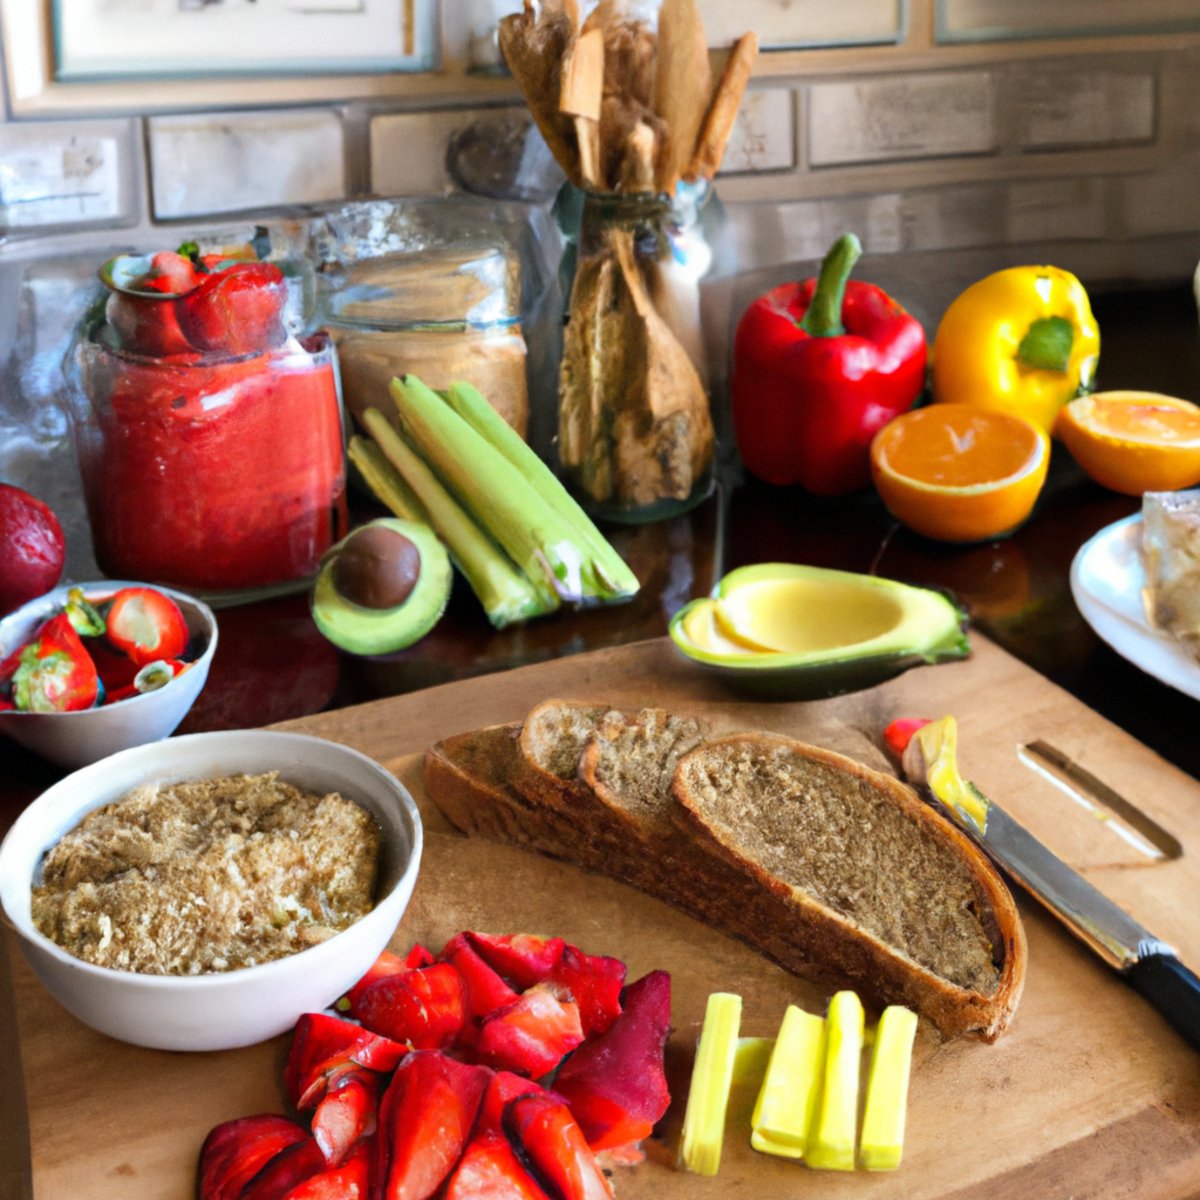 The photo features a wooden cutting board with an array of colorful fruits and vegetables, including ripe strawberries, juicy watermelon slices, vibrant bell peppers, and crisp celery stalks. In the foreground, a bowl of quinoa salad with diced tomatoes and avocado is displayed, while a jar of almond butter and a loaf of gluten-free bread sit on the side. The natural lighting highlights the freshness and wholesome nature of the ingredients, inviting the reader to explore the world of gluten-free eating for optimal health.